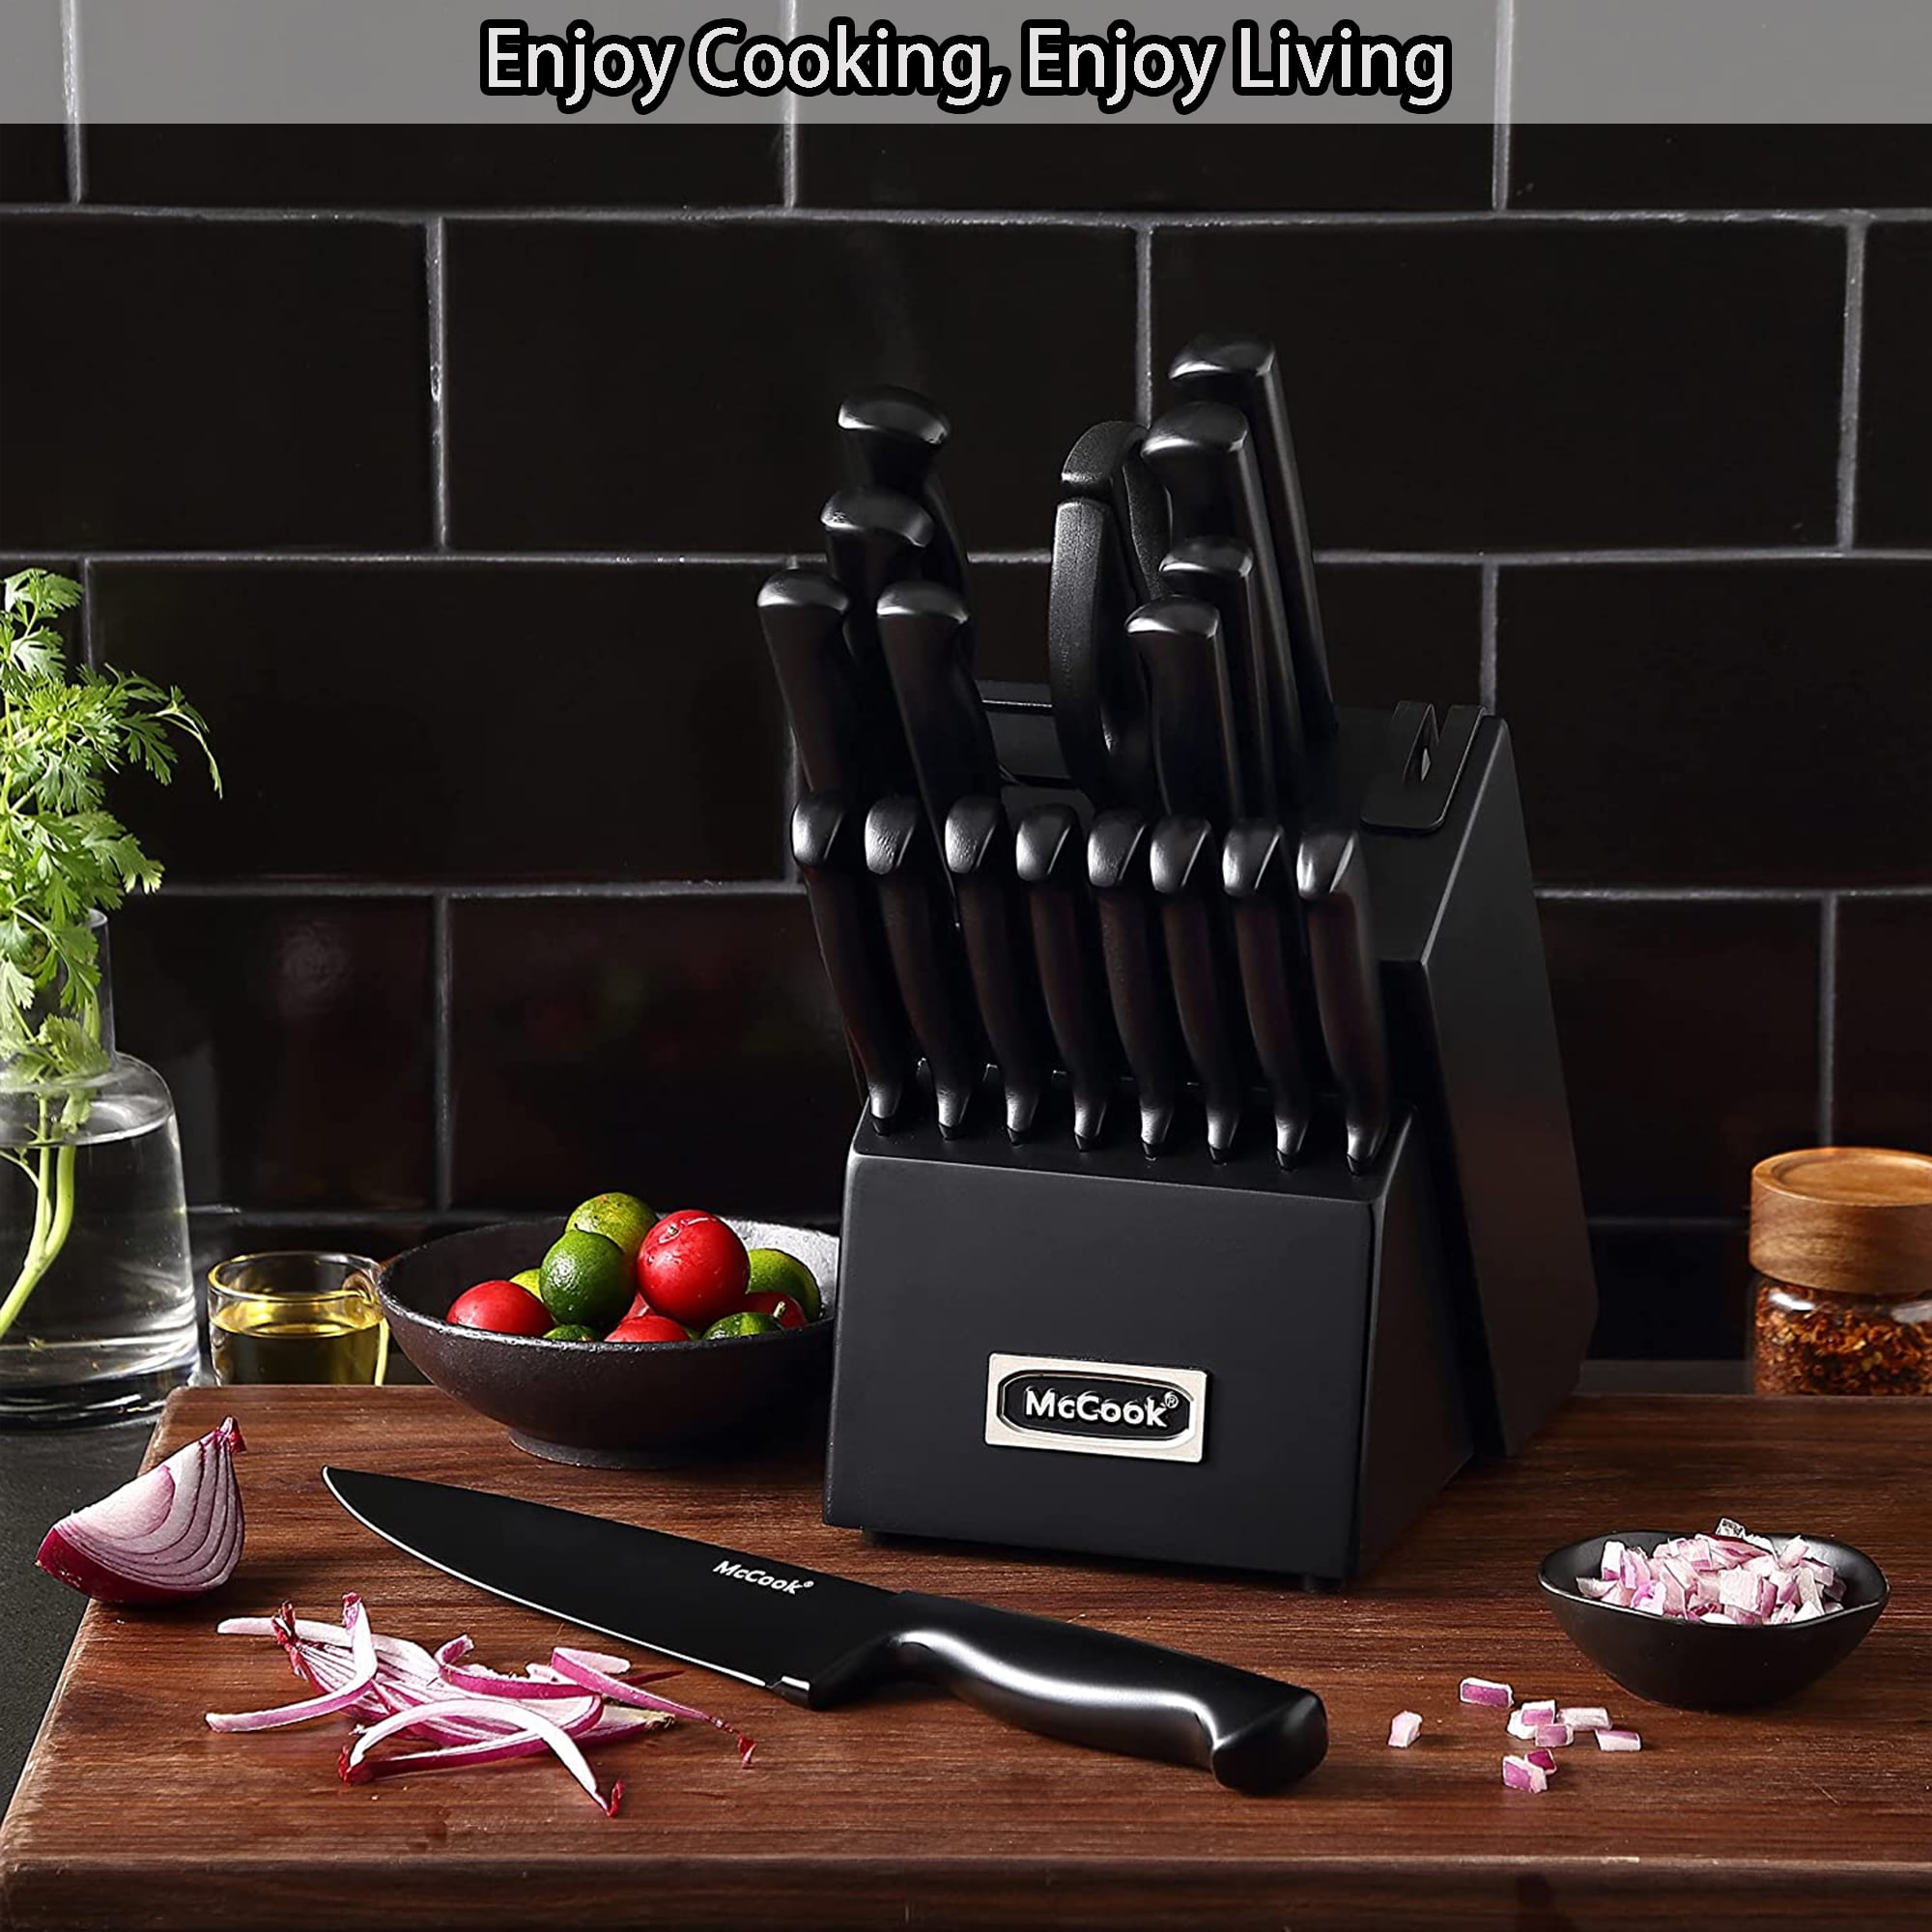 Knife Sets,McCook MC65B 20 Piece German Stainless Steel Forged Kitchen Knife Block Set, Cutlery Set with Black Block